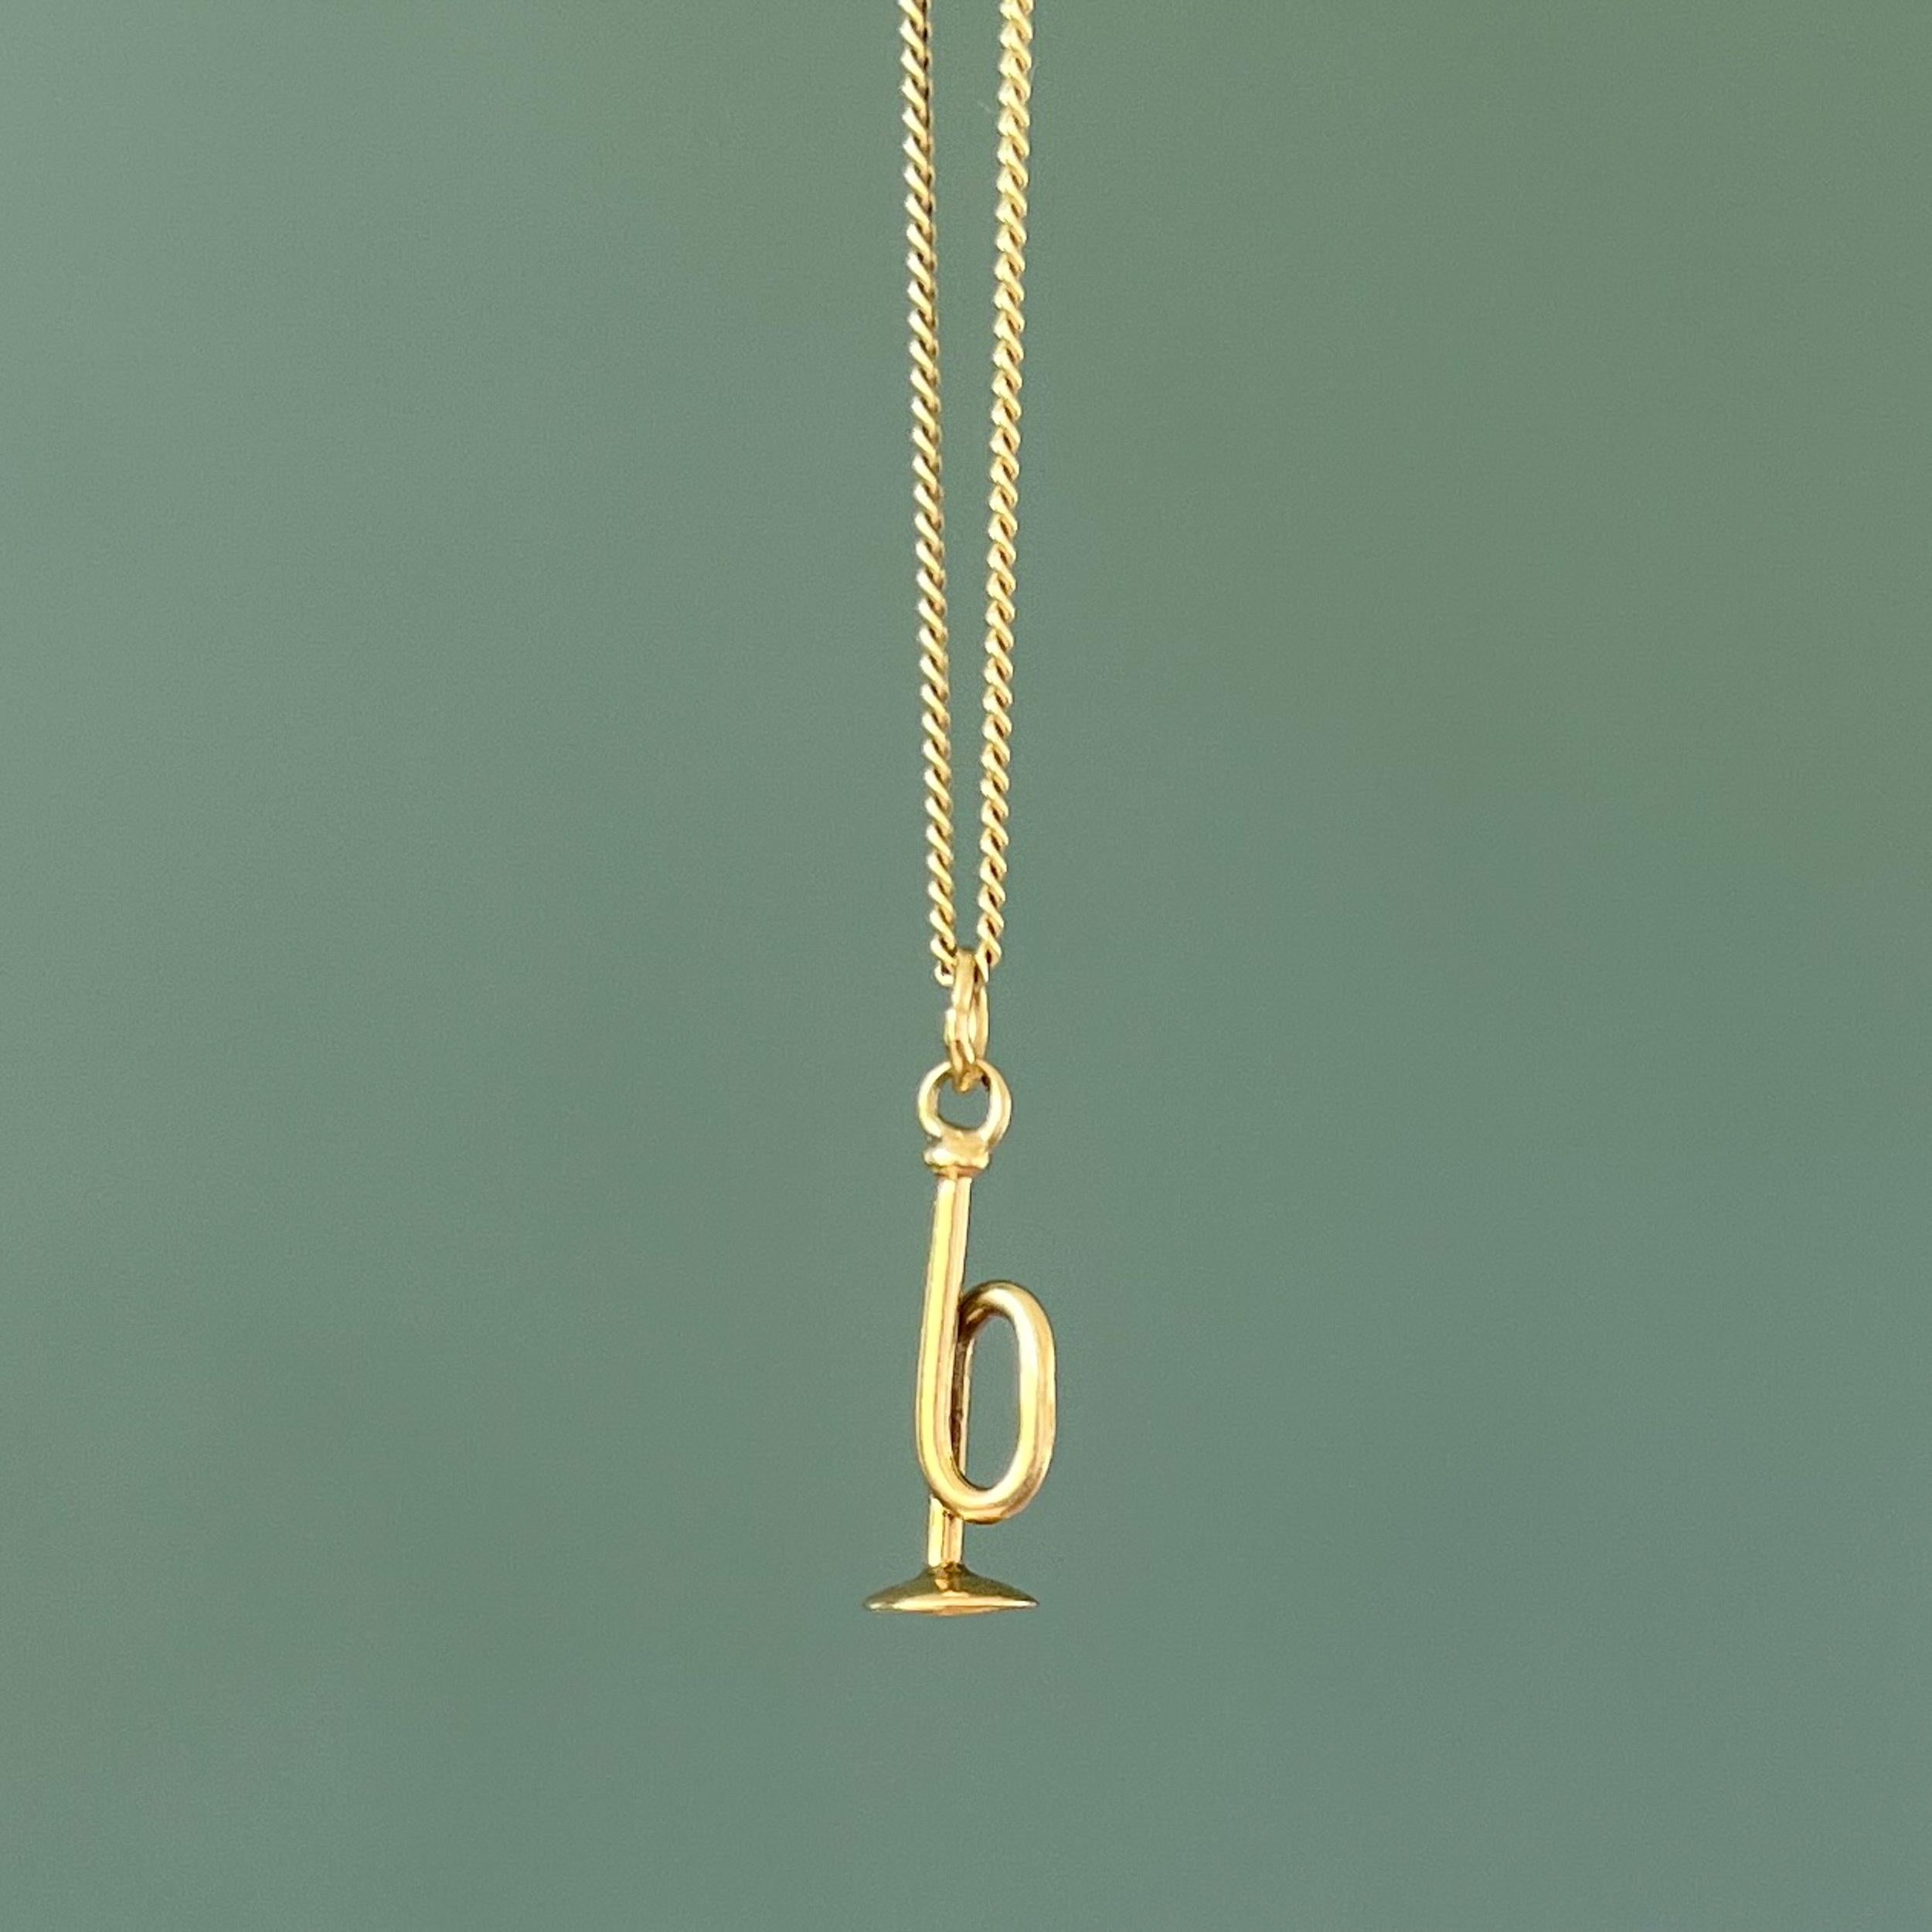 A lovely vintage three-dimensional trumpet charm pendant. The trumpet is nicely polished and created in 14 karat yellow gold. The great thing about charms is that you can collect them as wearable memories and add them to your necklace, charm